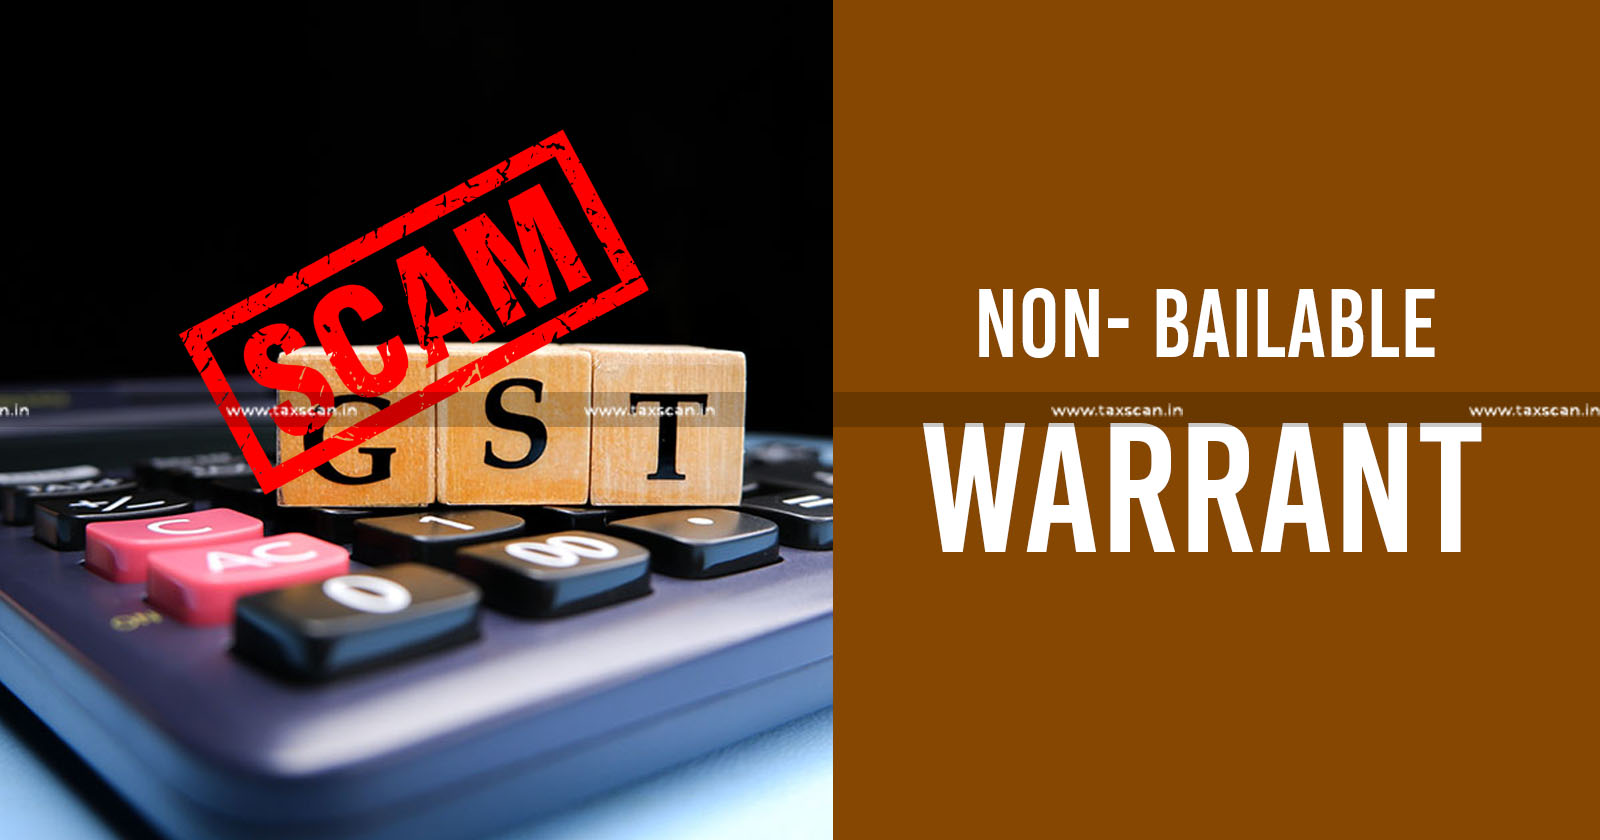 GST Scam - GST - Noida Police Issues Non-Bailable Warrant - Noida Police - Non-Bailable Warrant - Defrauding Govt Using Fake Documents - Taxscan